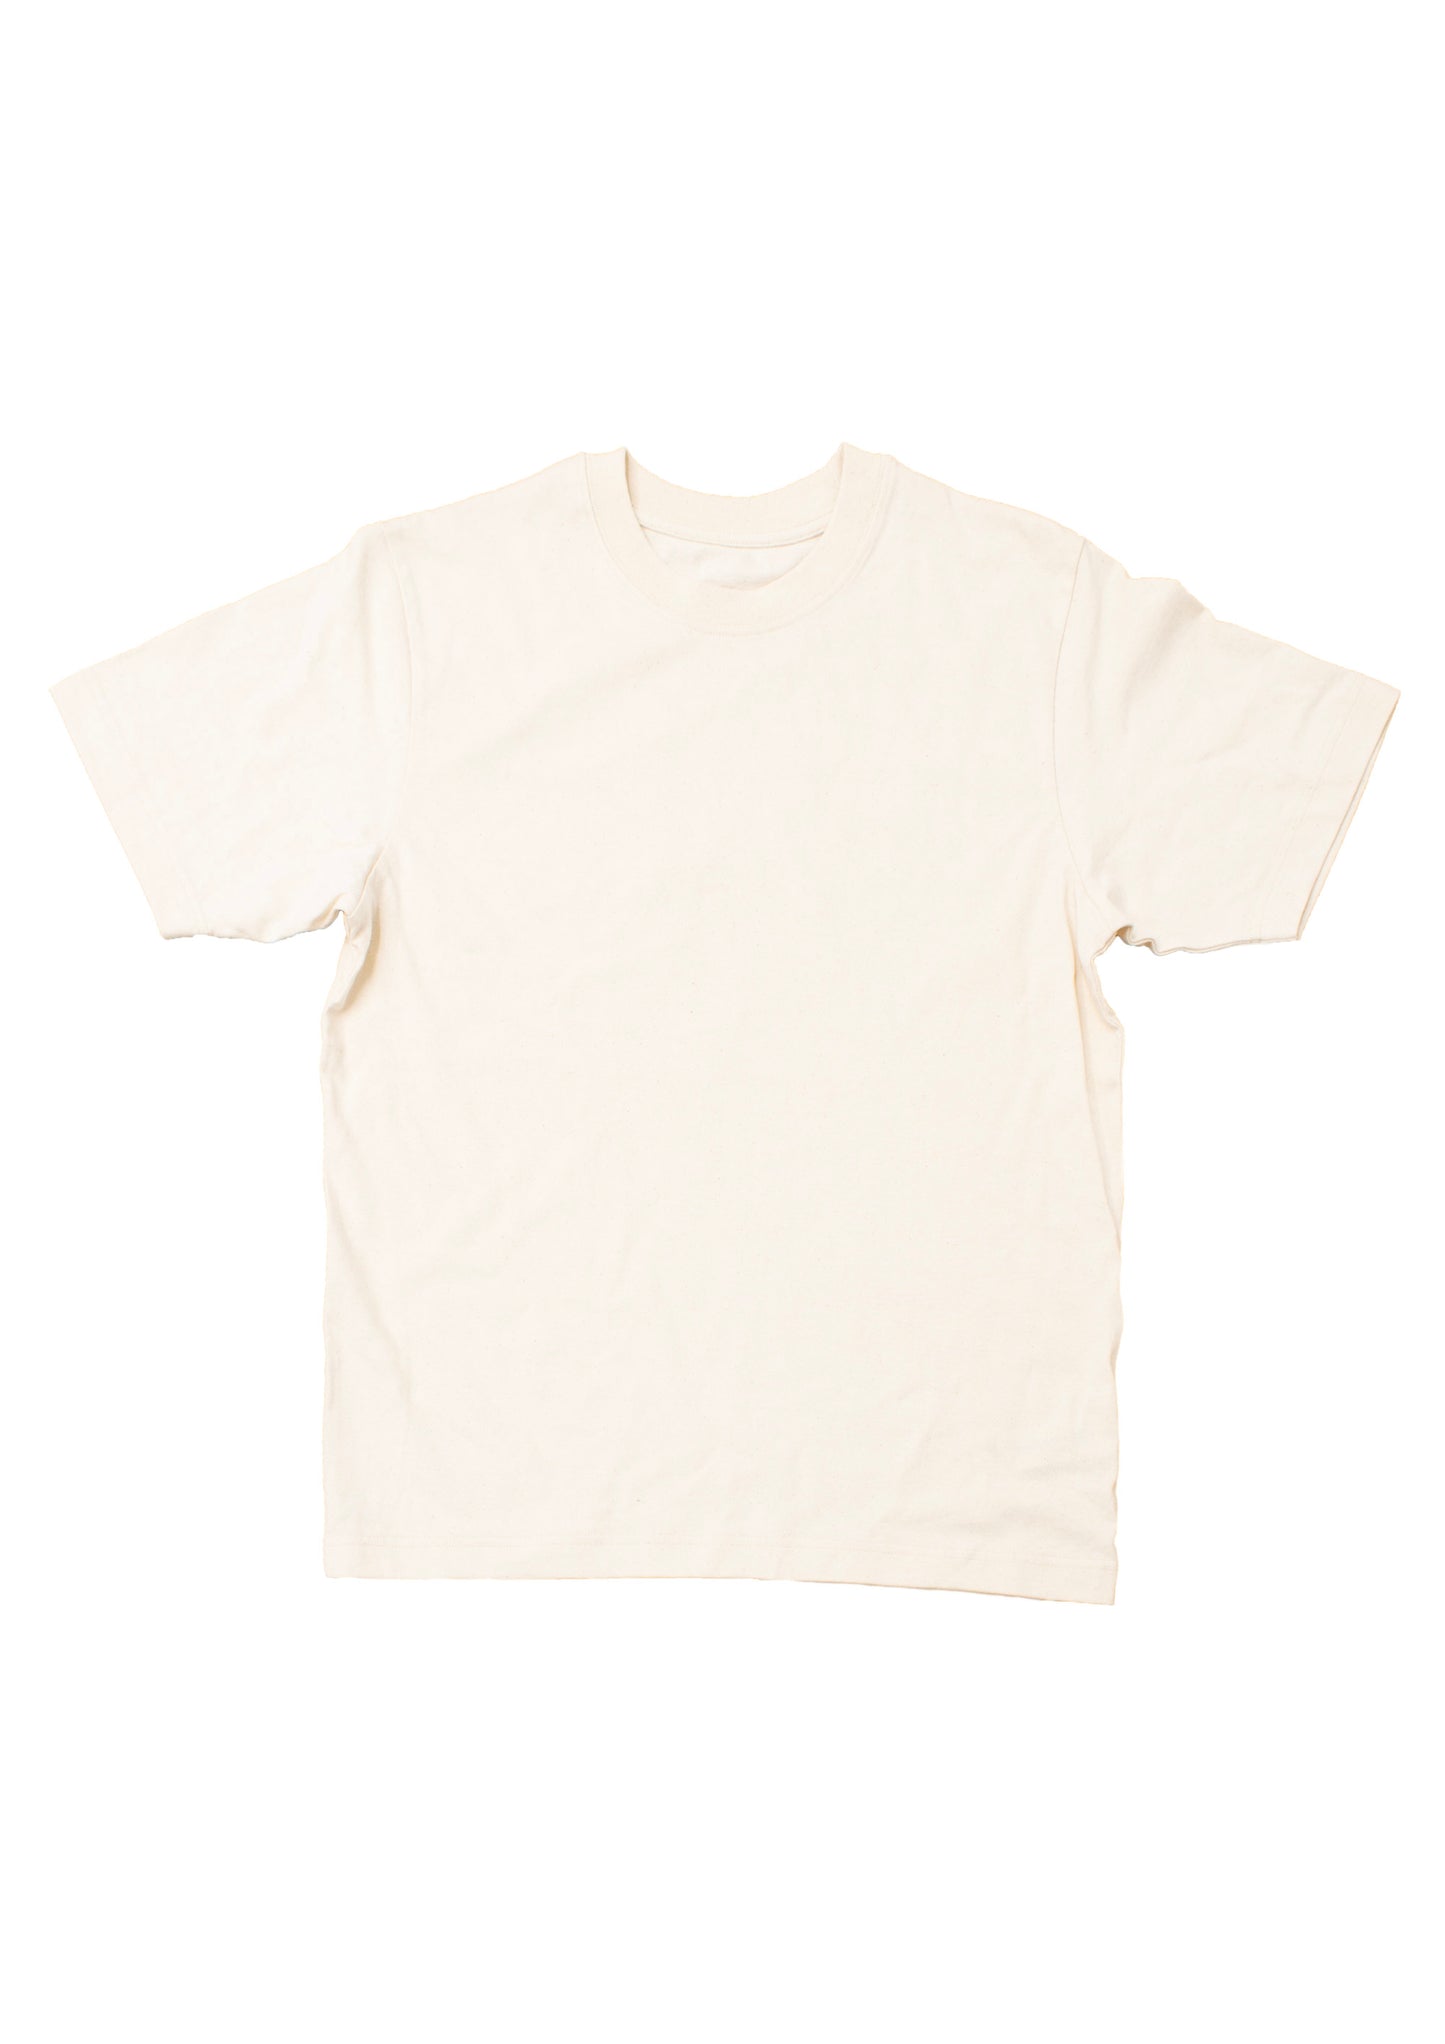 Branches T-shirt